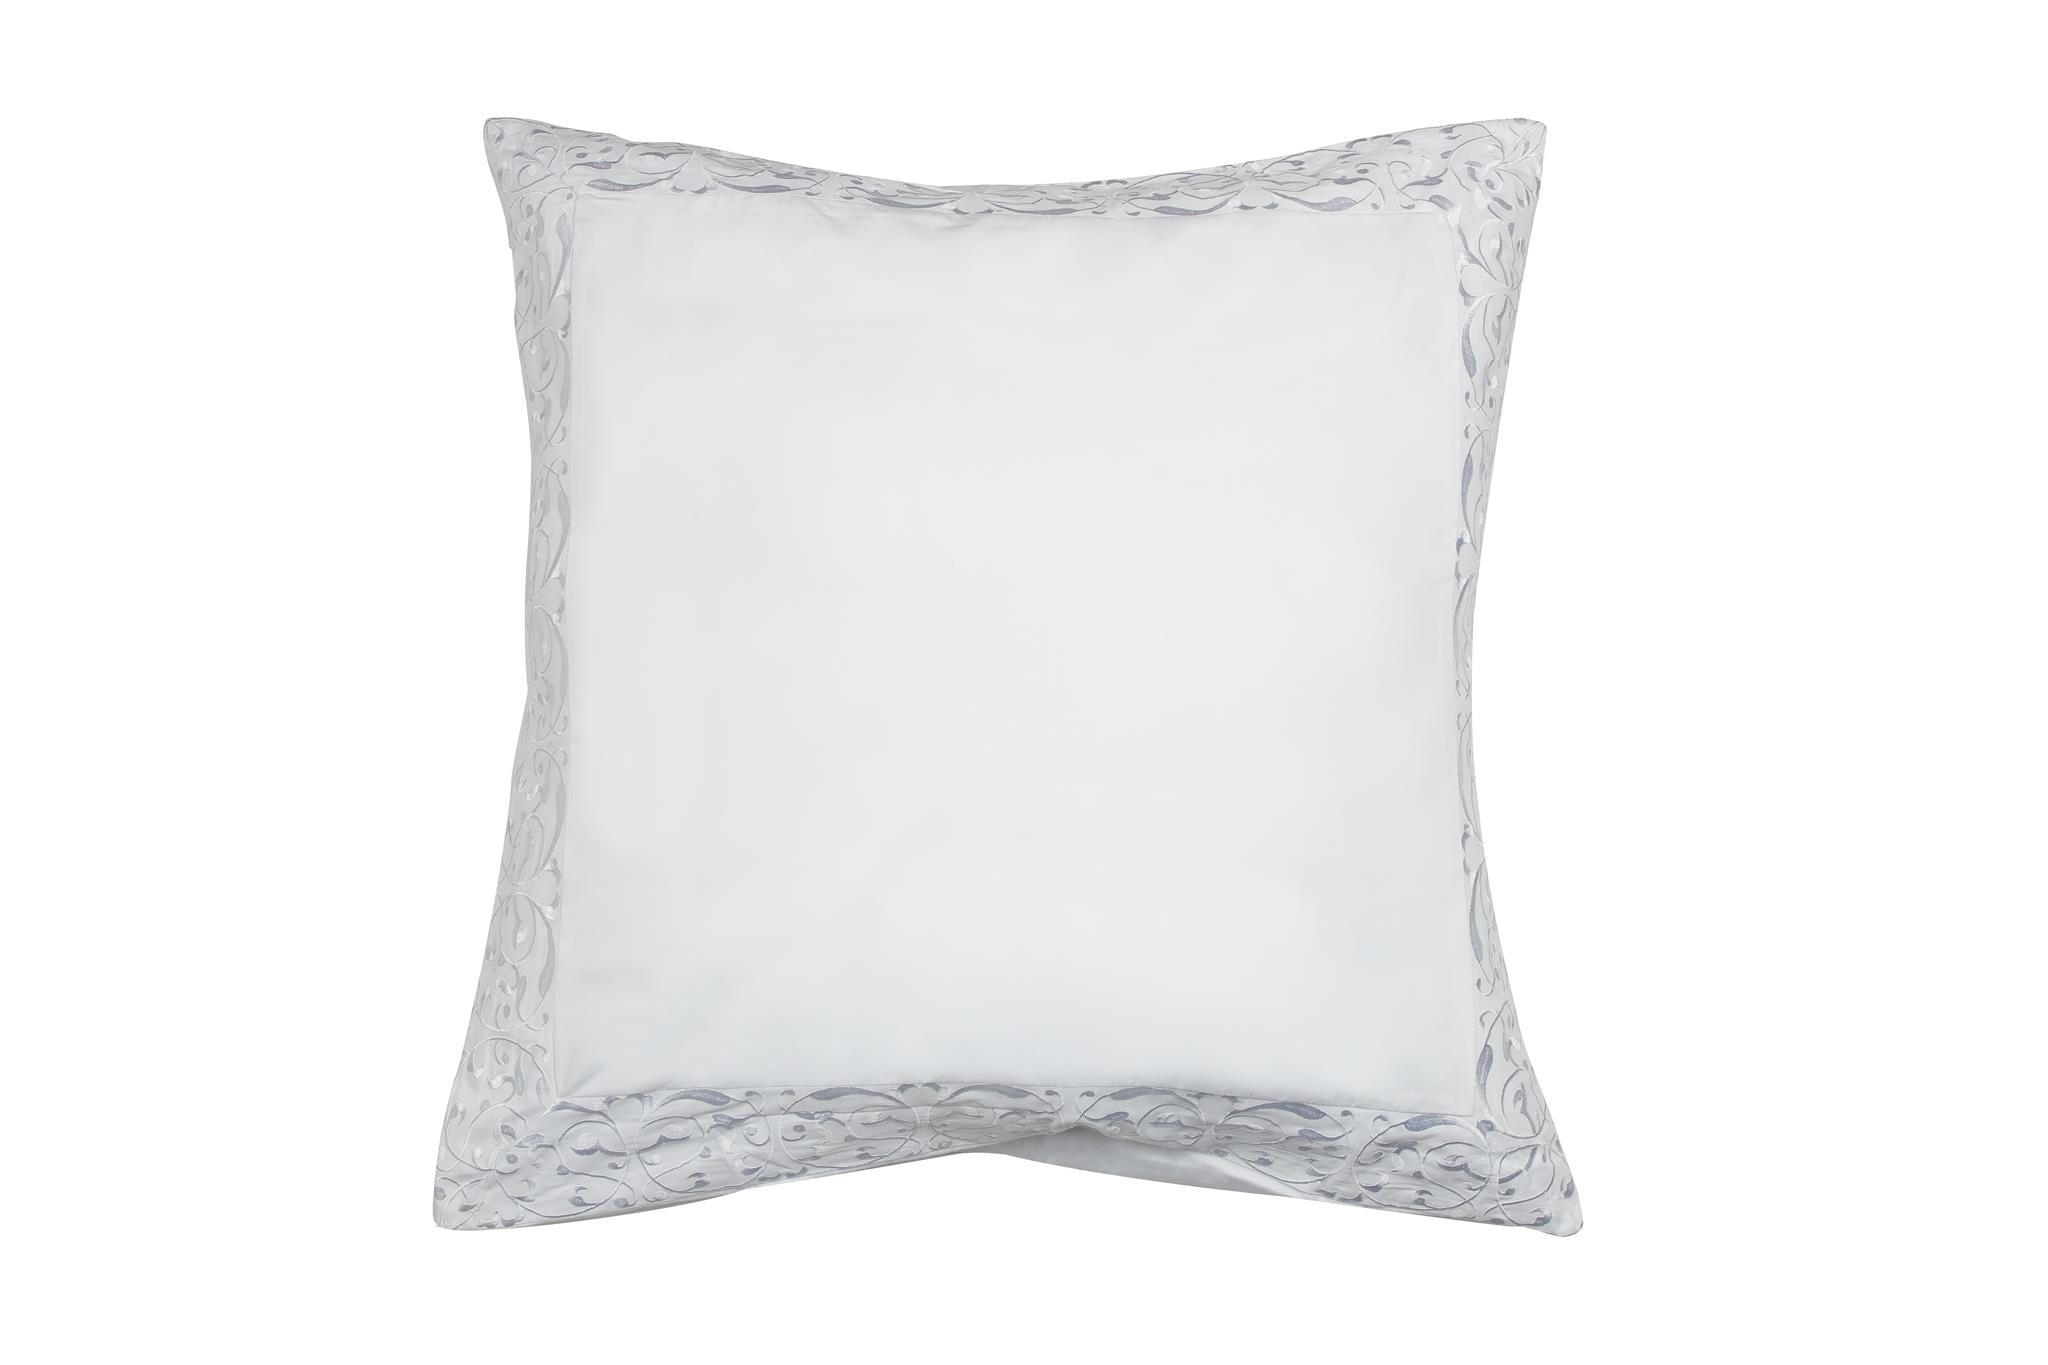 Single Taupe 1 Euro/Square Size Pillow Sham with Metallic Accent 26in x 26in 